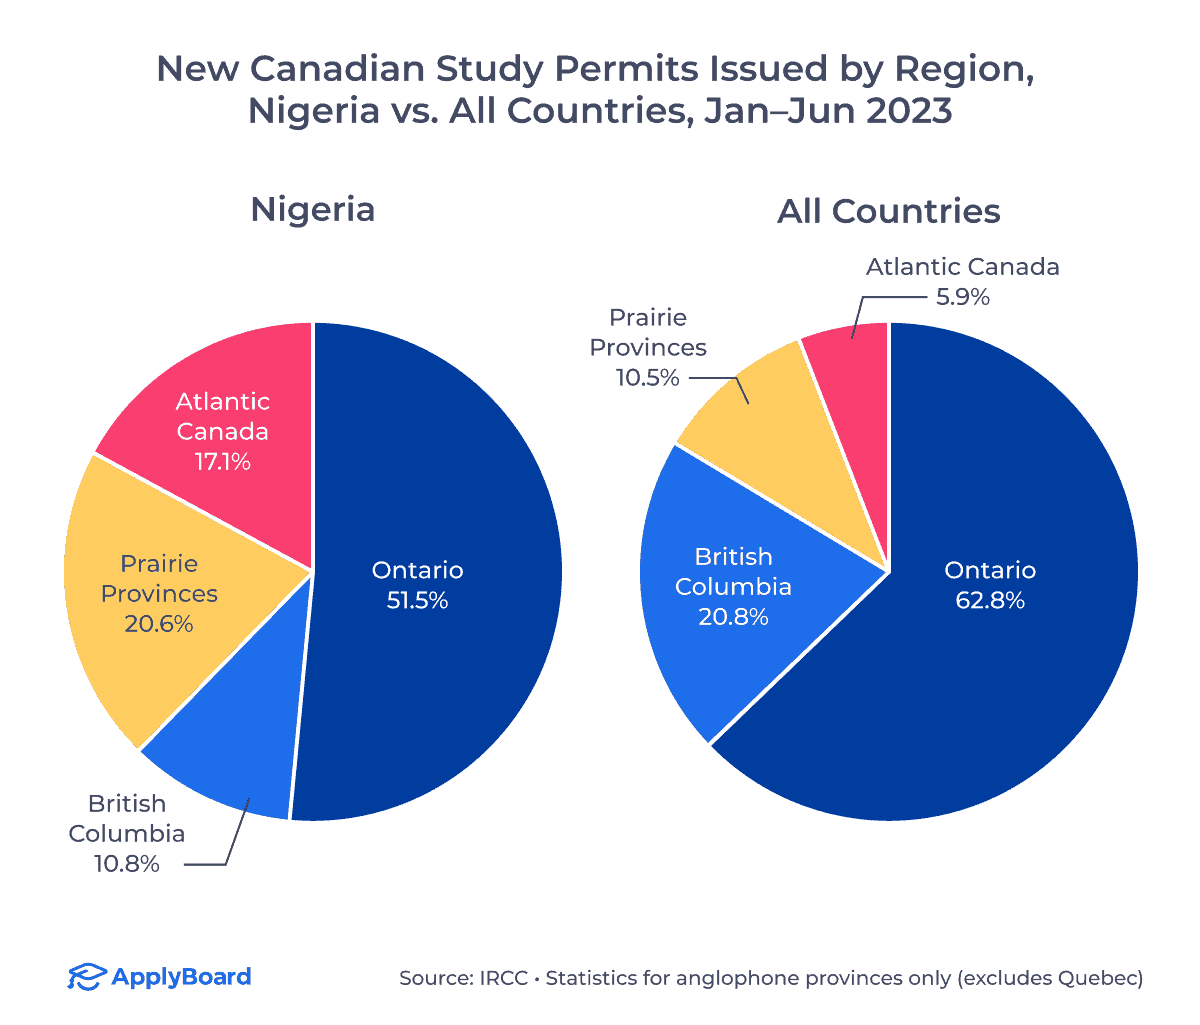 Two pie charts comparing the distribution of new study permits issued to Nigerian students and all students across the regions of anglophone Canada from January to June 2023. 